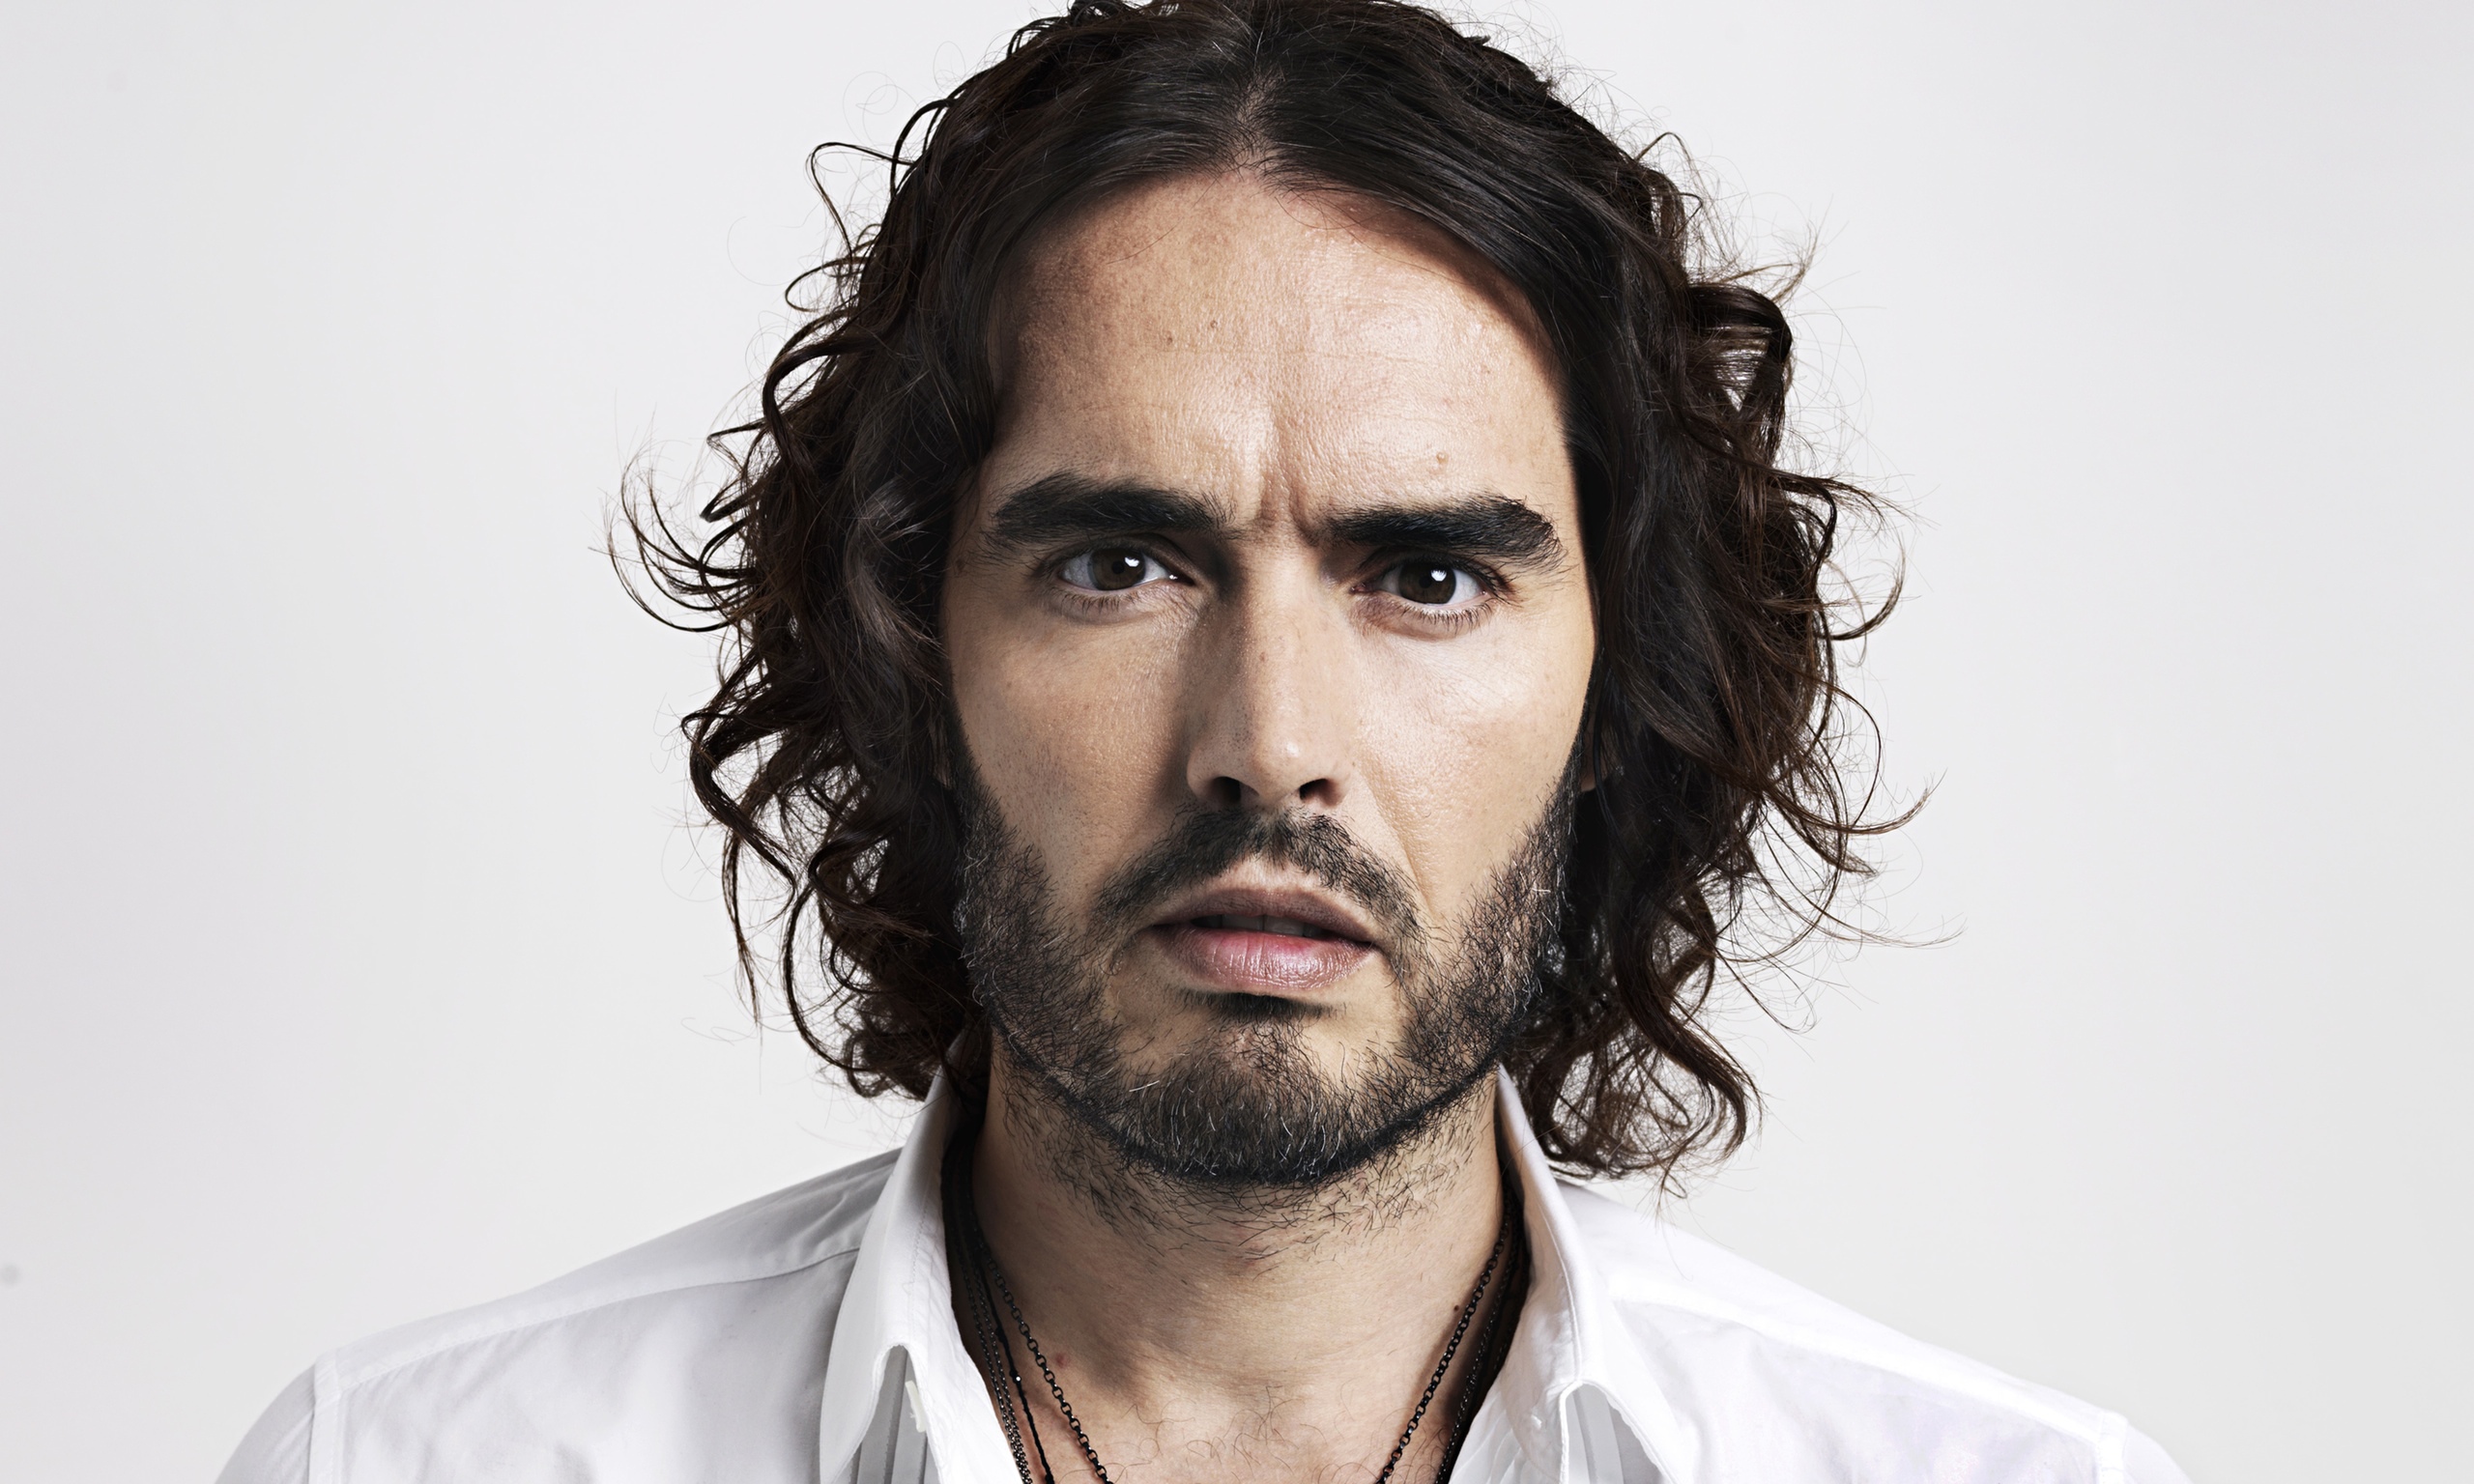 Russell Brand: I want to address the alienation and despair.